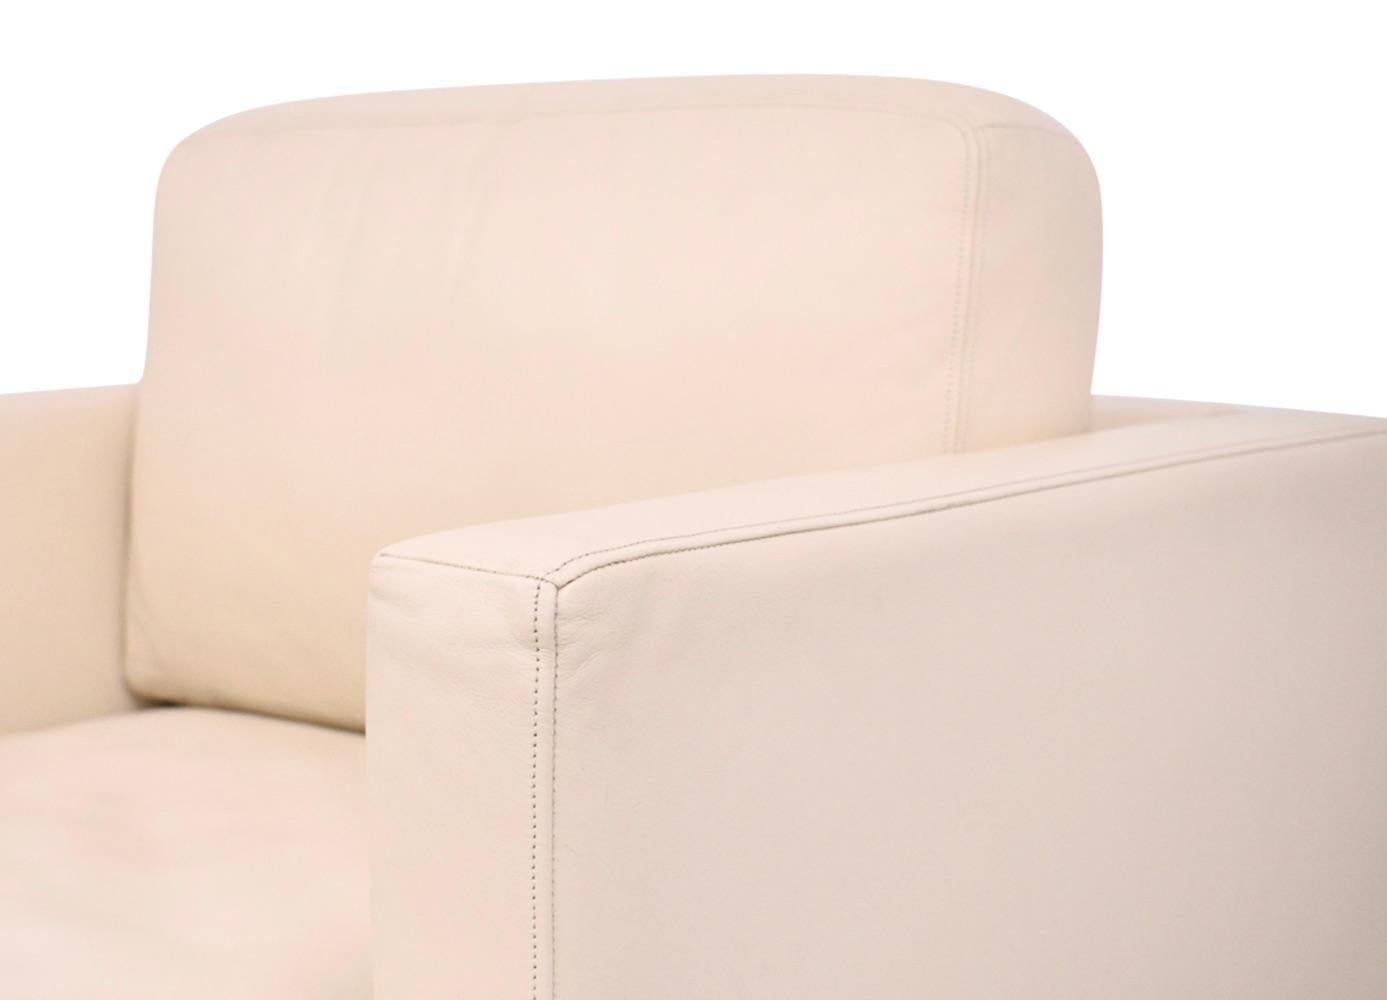 Defined by a low profile, boldly outlined architectural surrounds and soft interior cushions, the D'Urso Residential Lounge collection delivers casual modern comfort to any interior.
Designed by Joseph Paul D'Urso, 2008
Vicenza Ponte Furo leather,